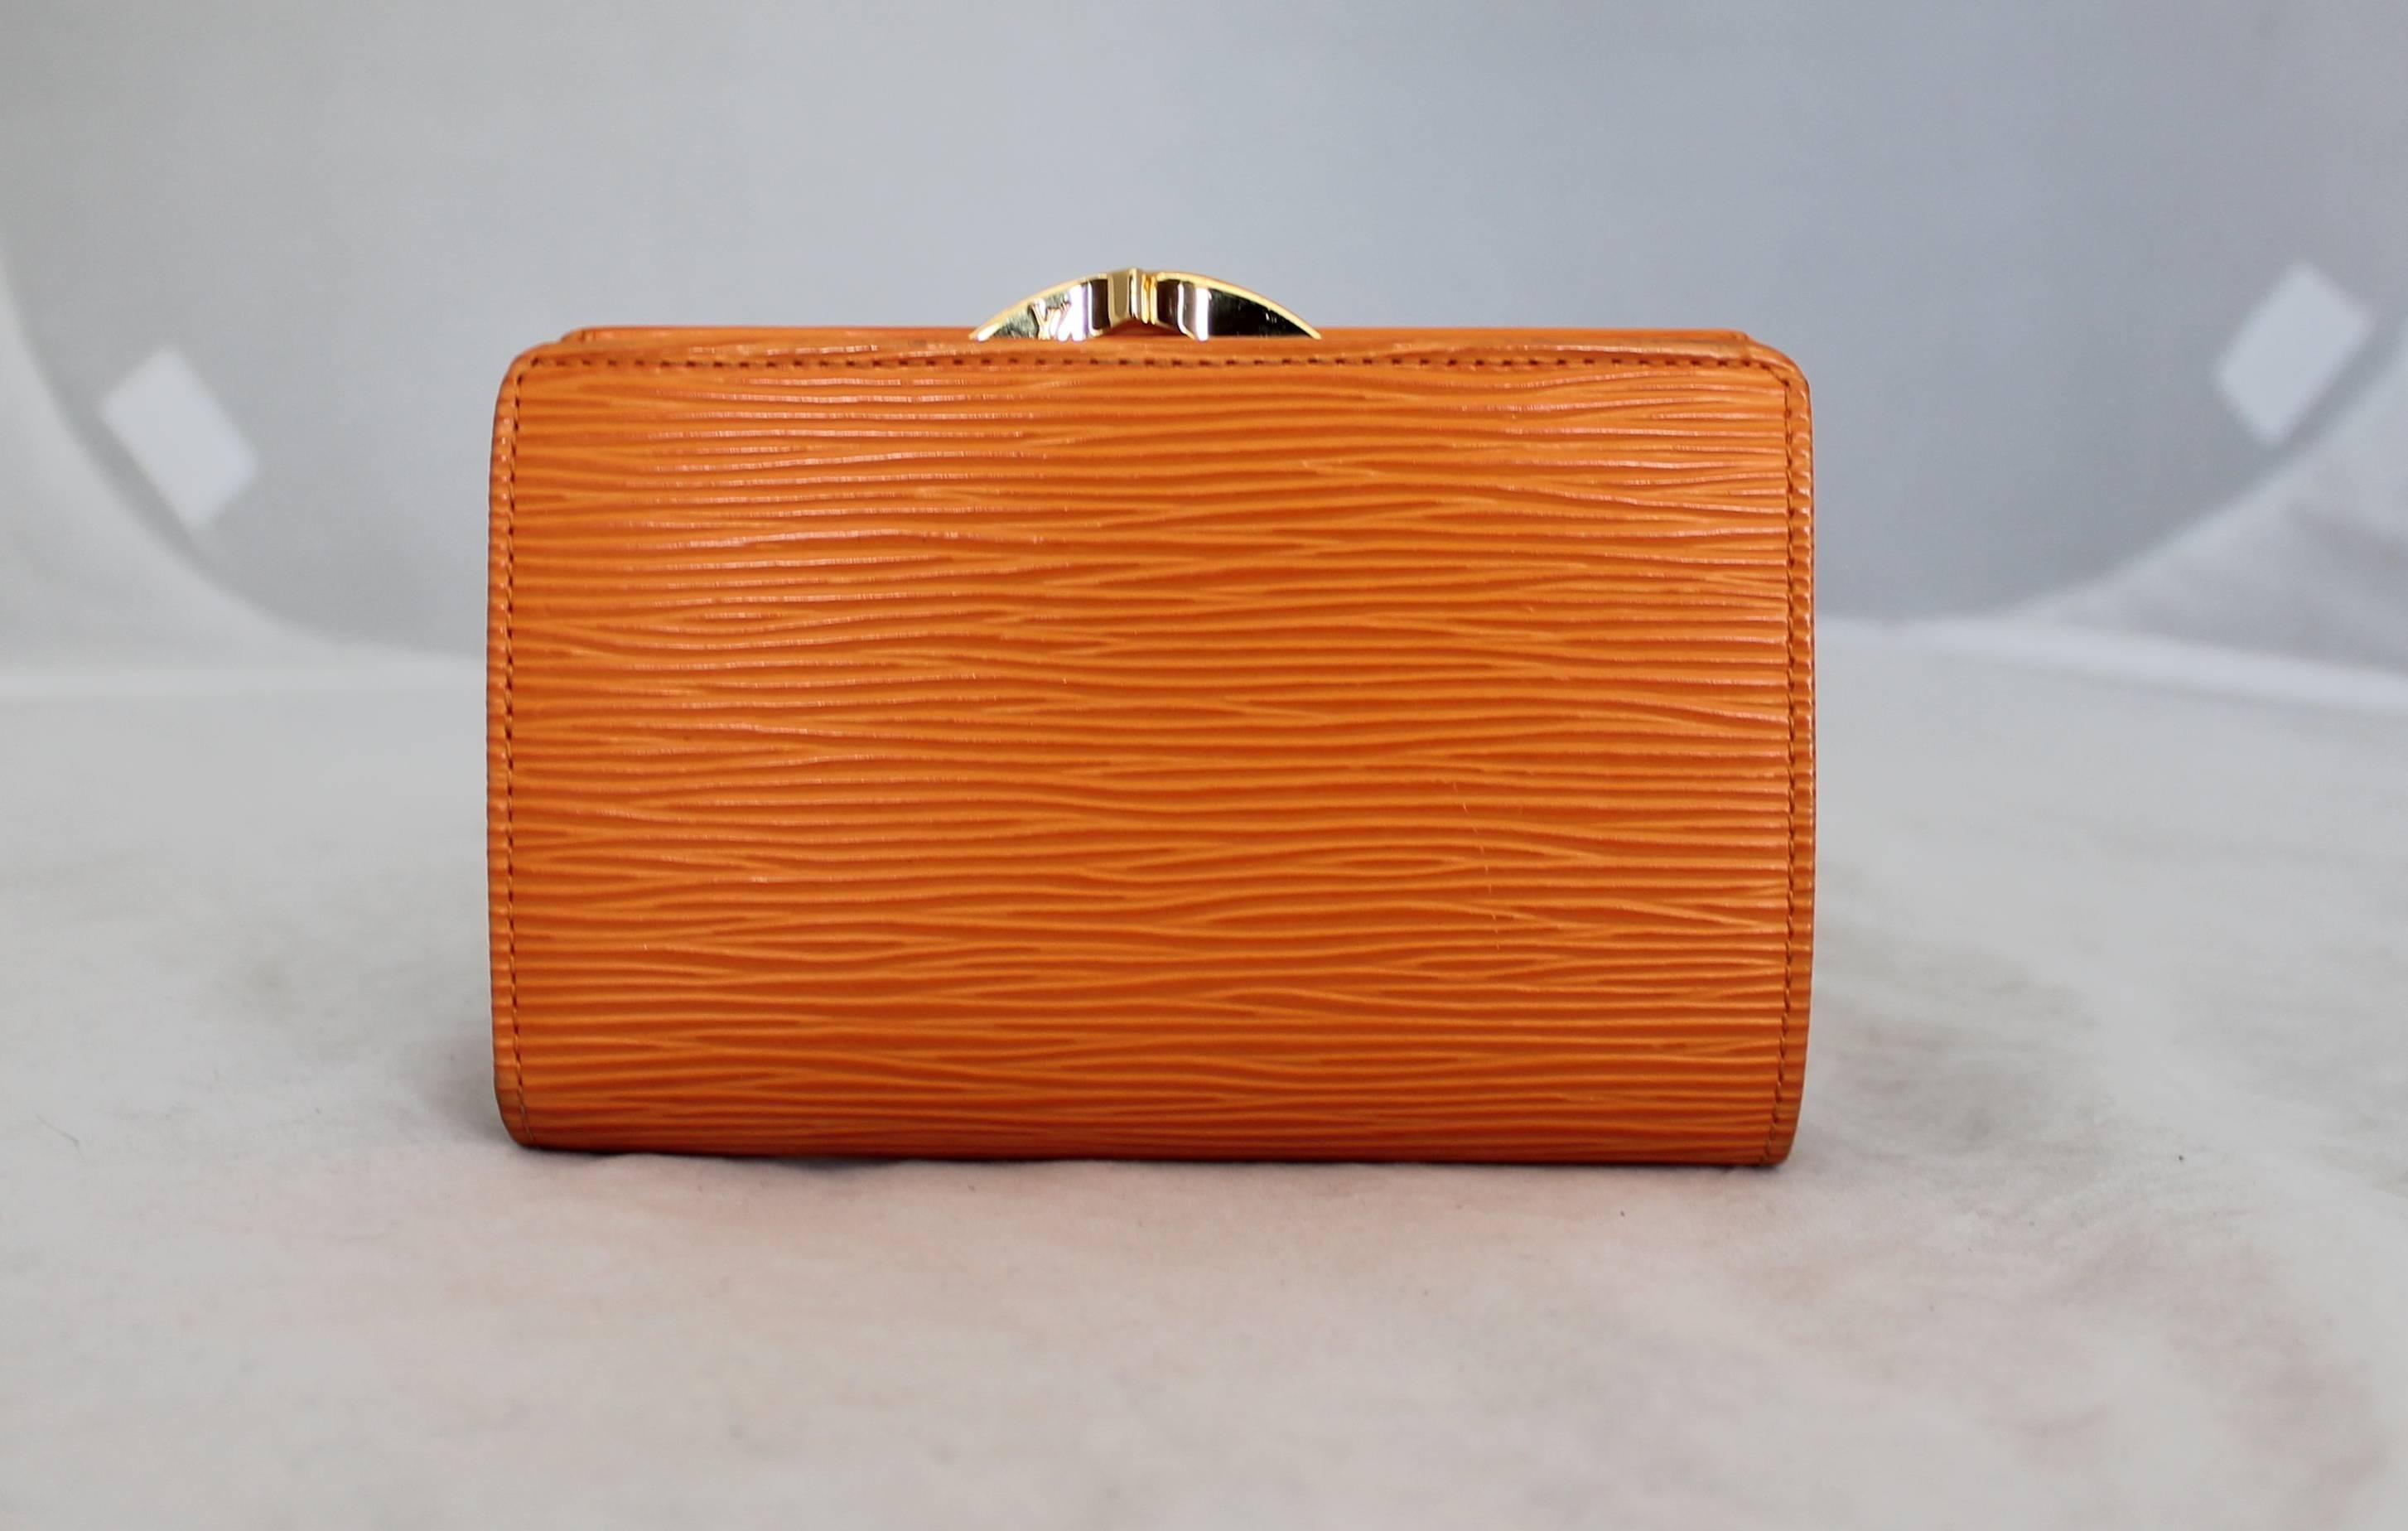 Louis Vuitton Orange Wallet. This Louis Vuitton epileather wallet is in excellent condition. It has a clasp at top and also has a coin purse with an old fashion clasp and card holder. It is from 2008. 

Wallet Dimensions:

Height- 3.5